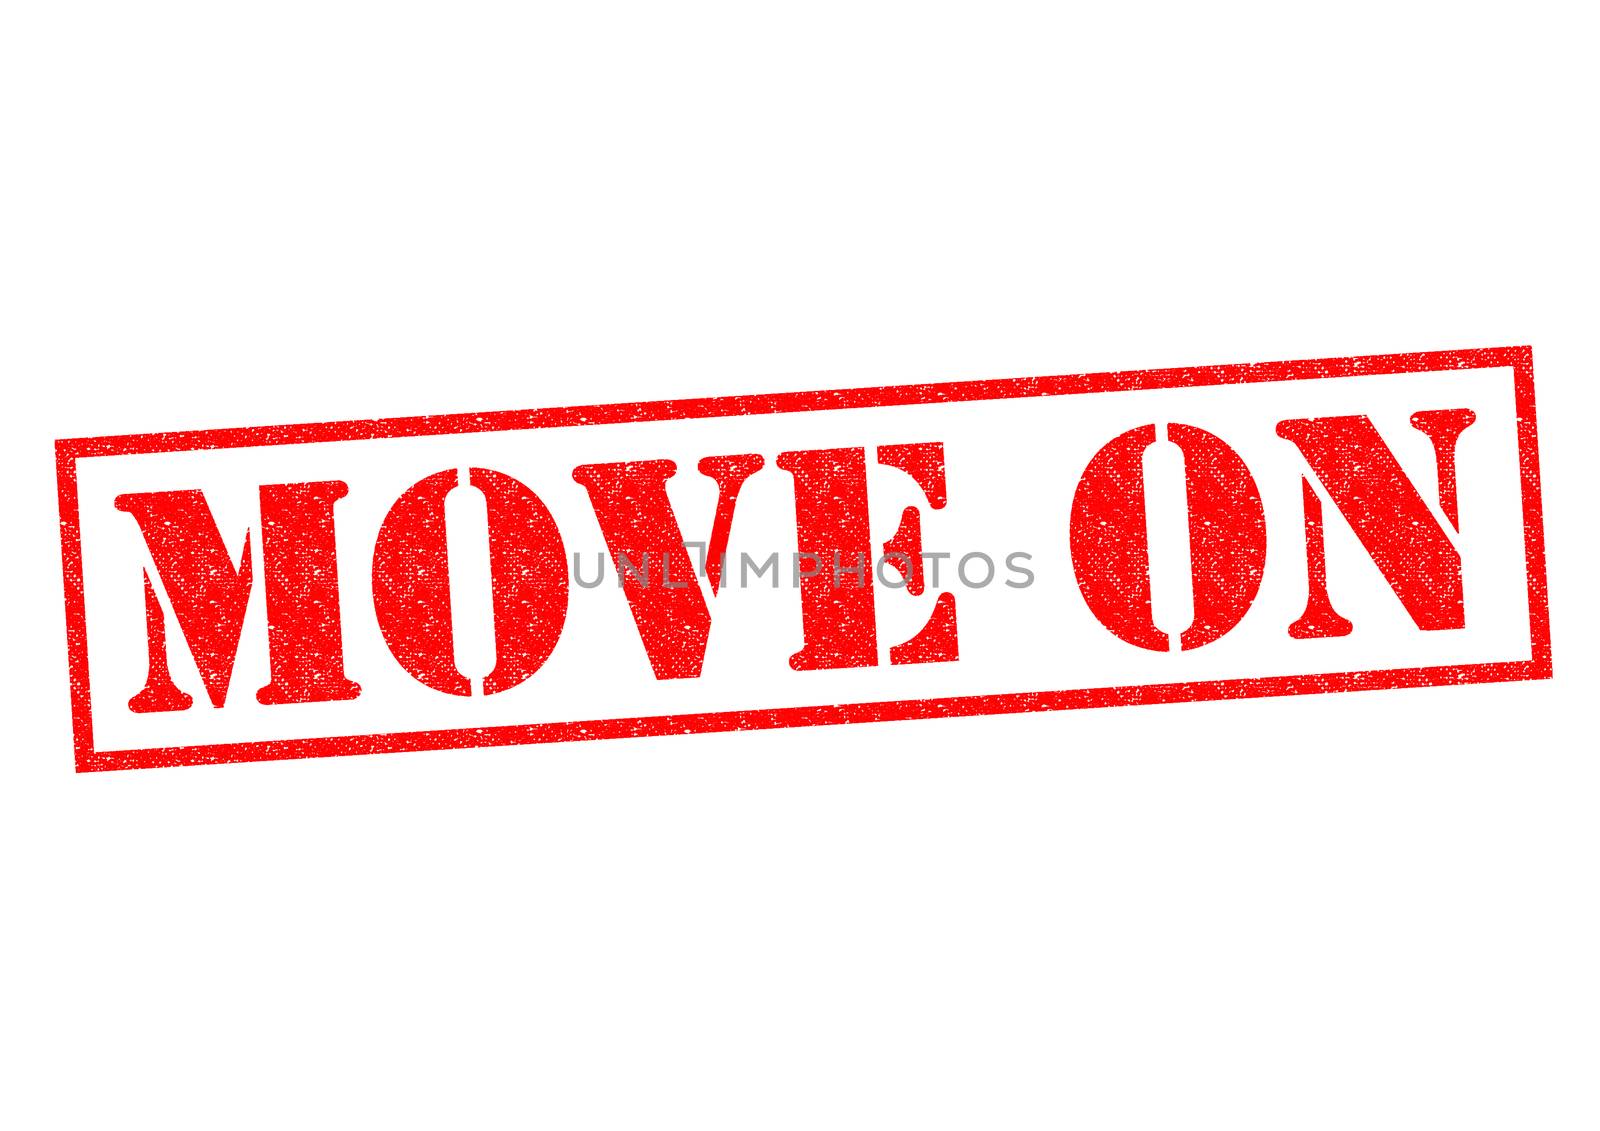 MOVE ON red Rubber Stamp over a white background.